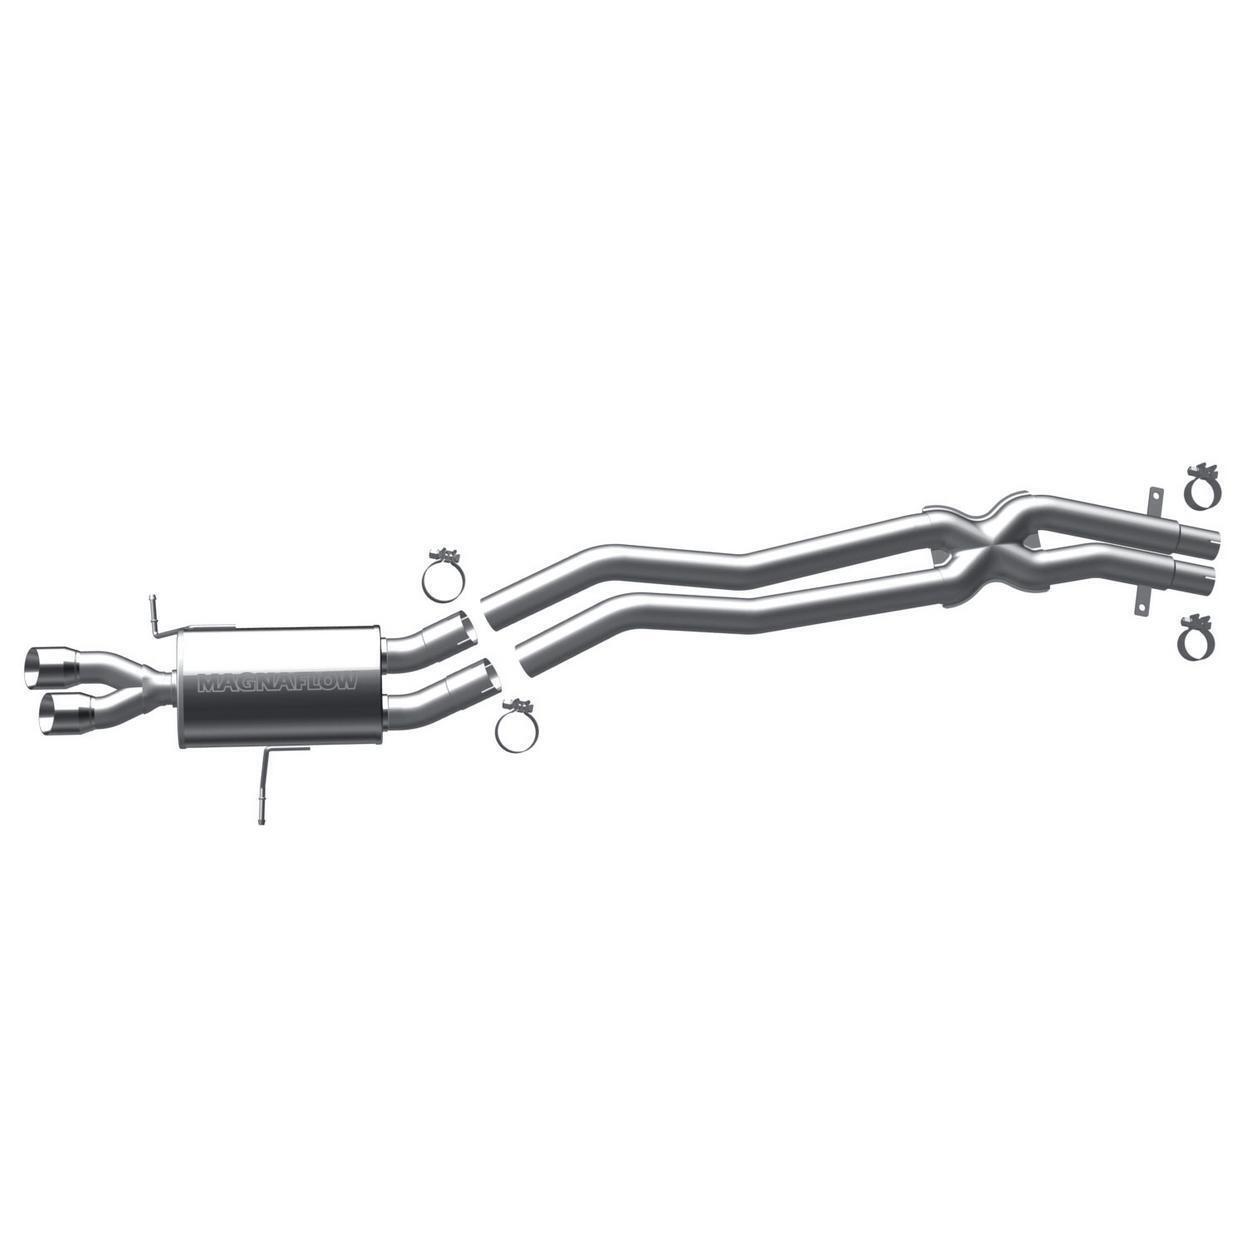 Exhaust System Kit for 2001-2004 BMW 325Ci